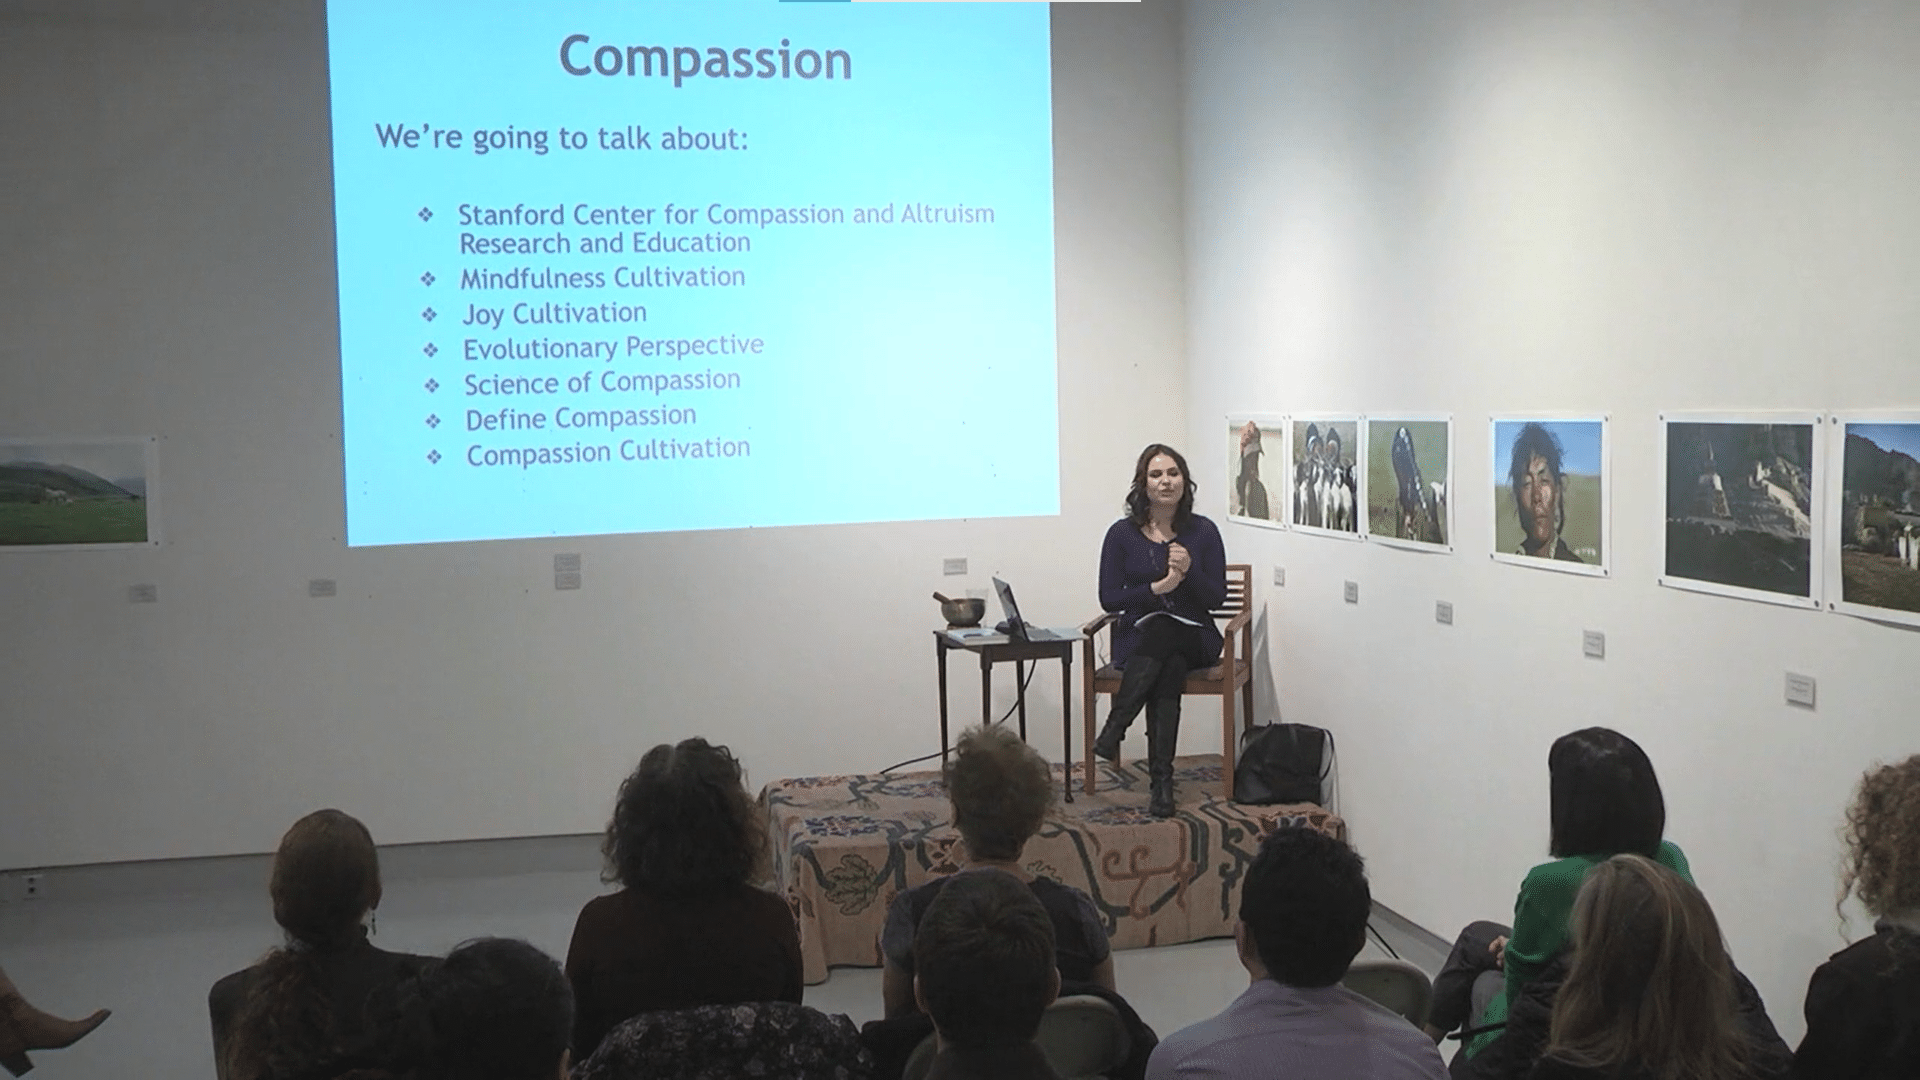 FORCE FOR GOOD: Compassion Training | 1/20/2016